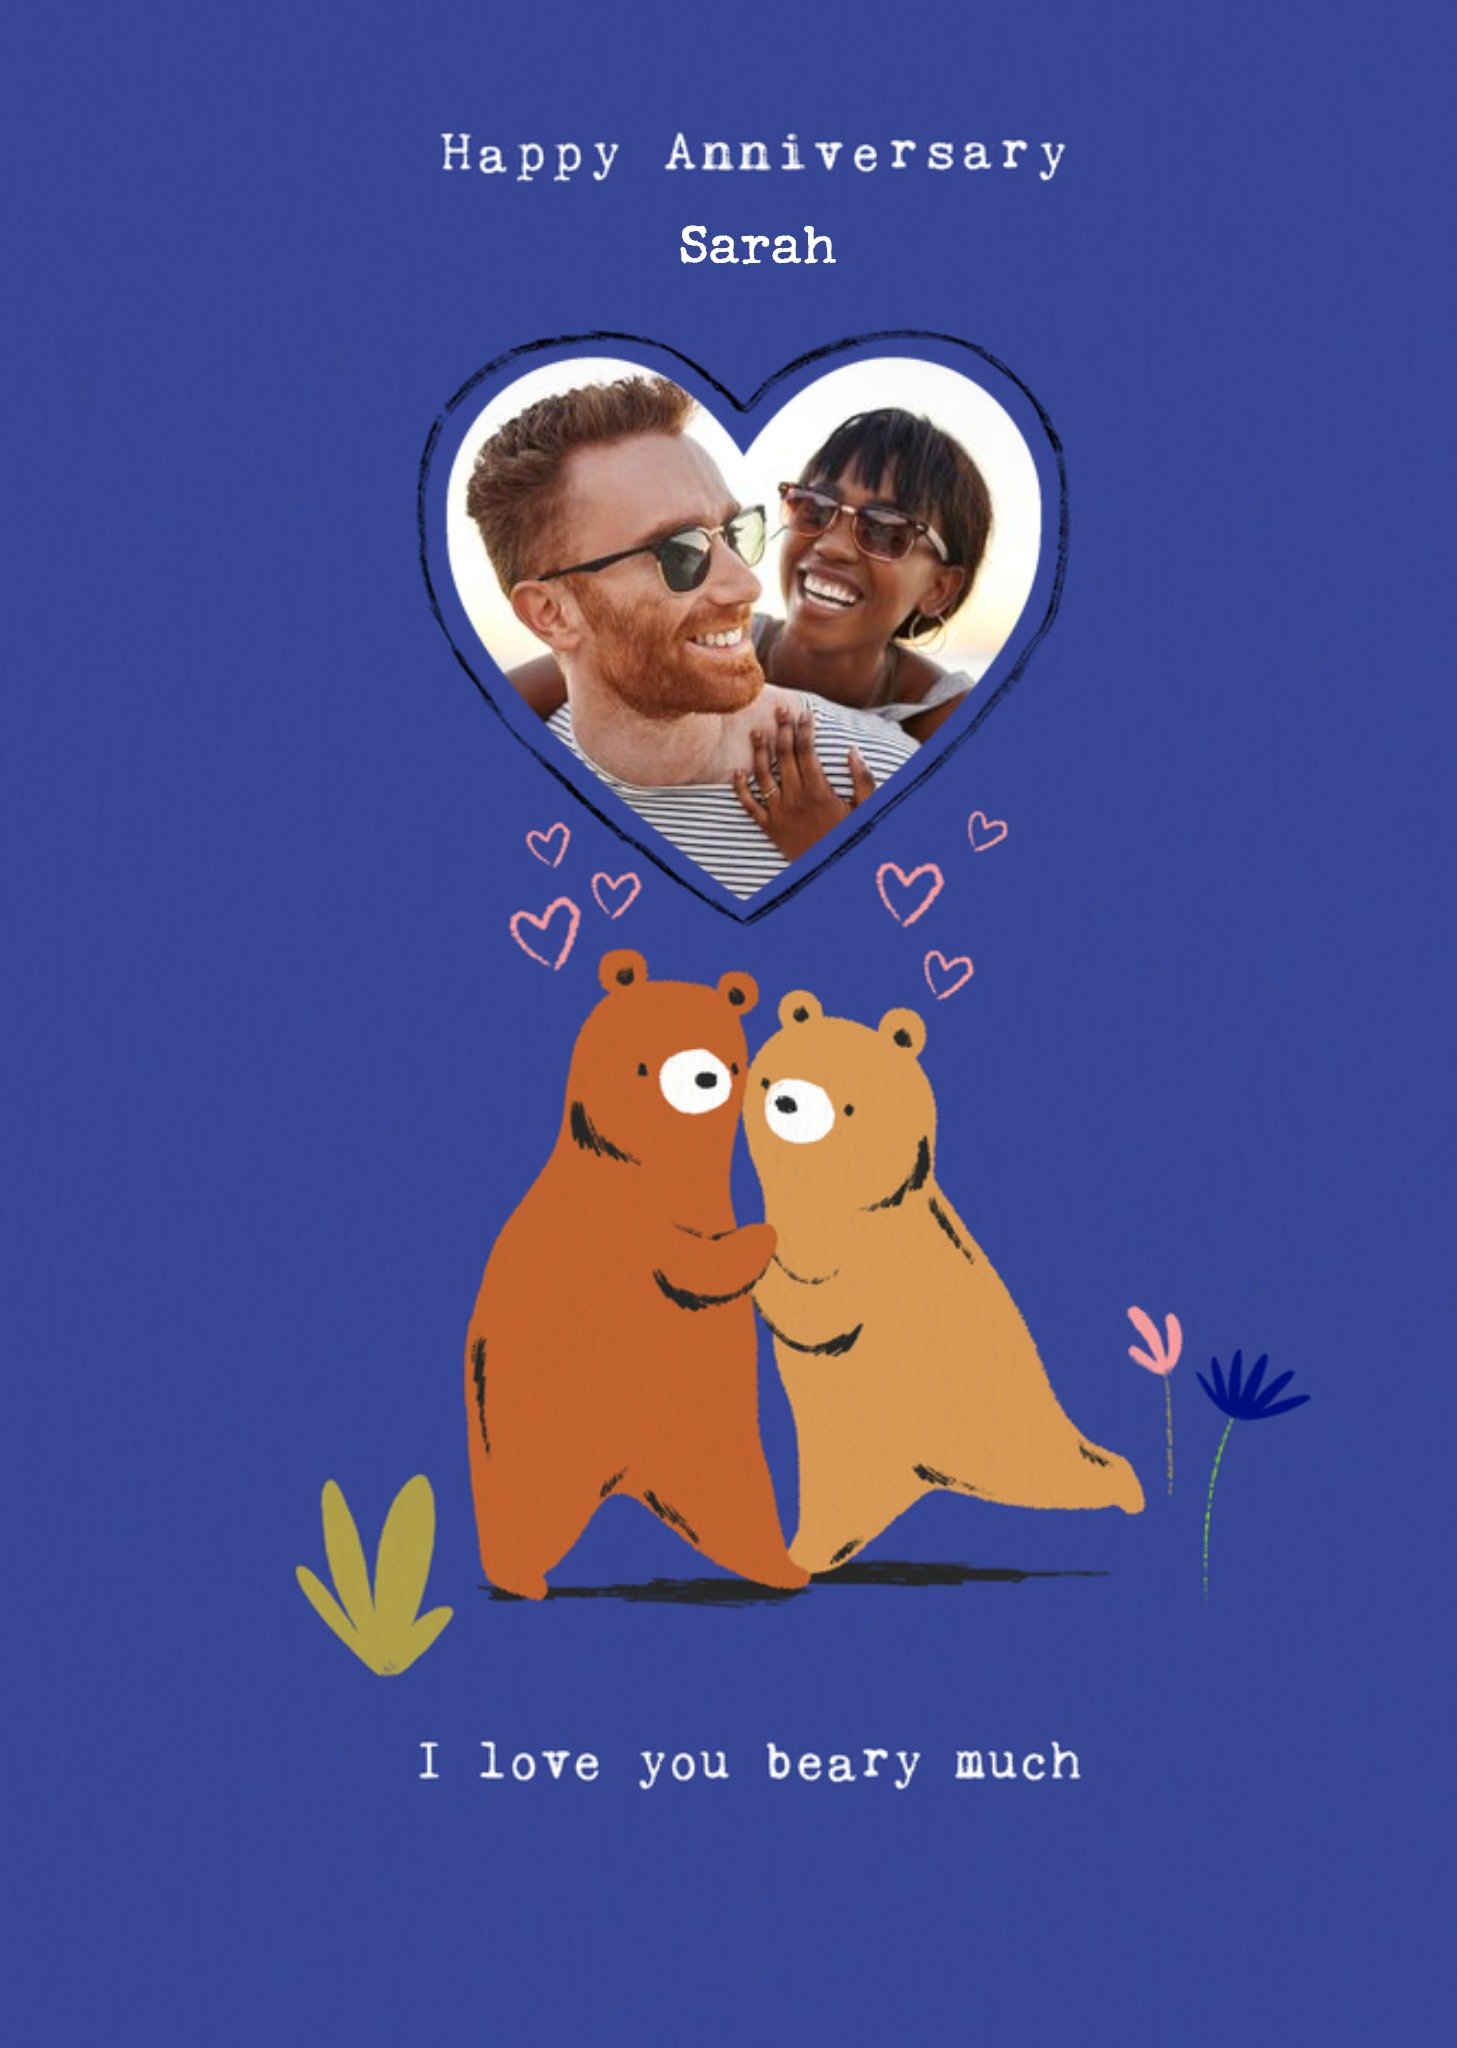 Moonpig Cute Two Bears Hugging Each Other I Love You Beary Much Photo Upload Anniversary Card, Large